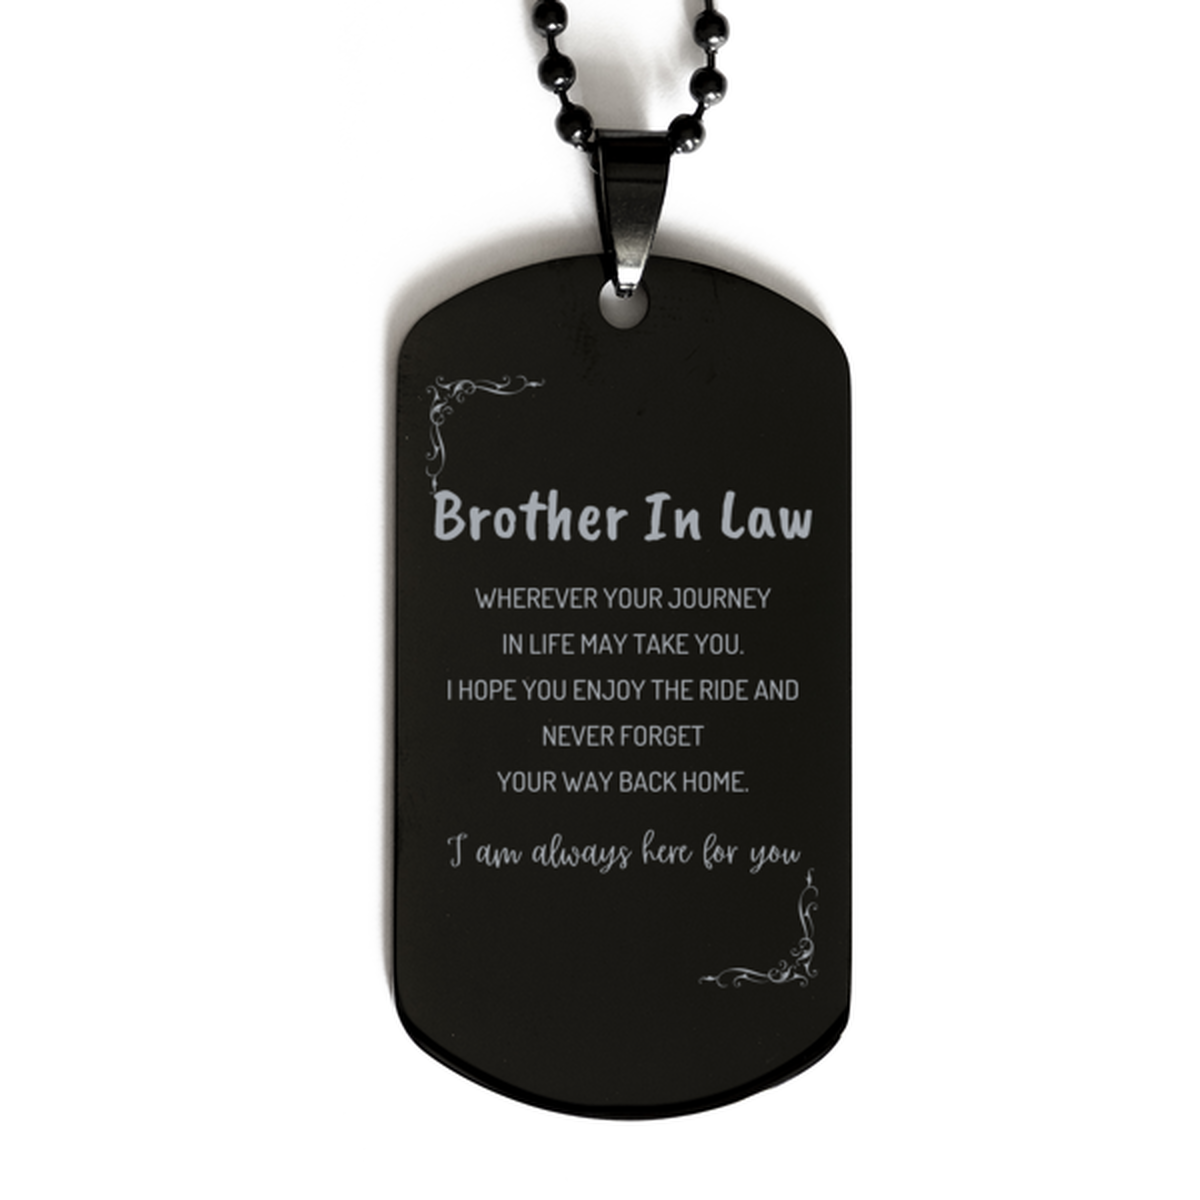 Brother In Law wherever your journey in life may take you, I am always here for you Brother In Law Black Dog Tag, Awesome Christmas Gifts For Brother In Law, Brother In Law Birthday Gifts for Men Women Family Loved One